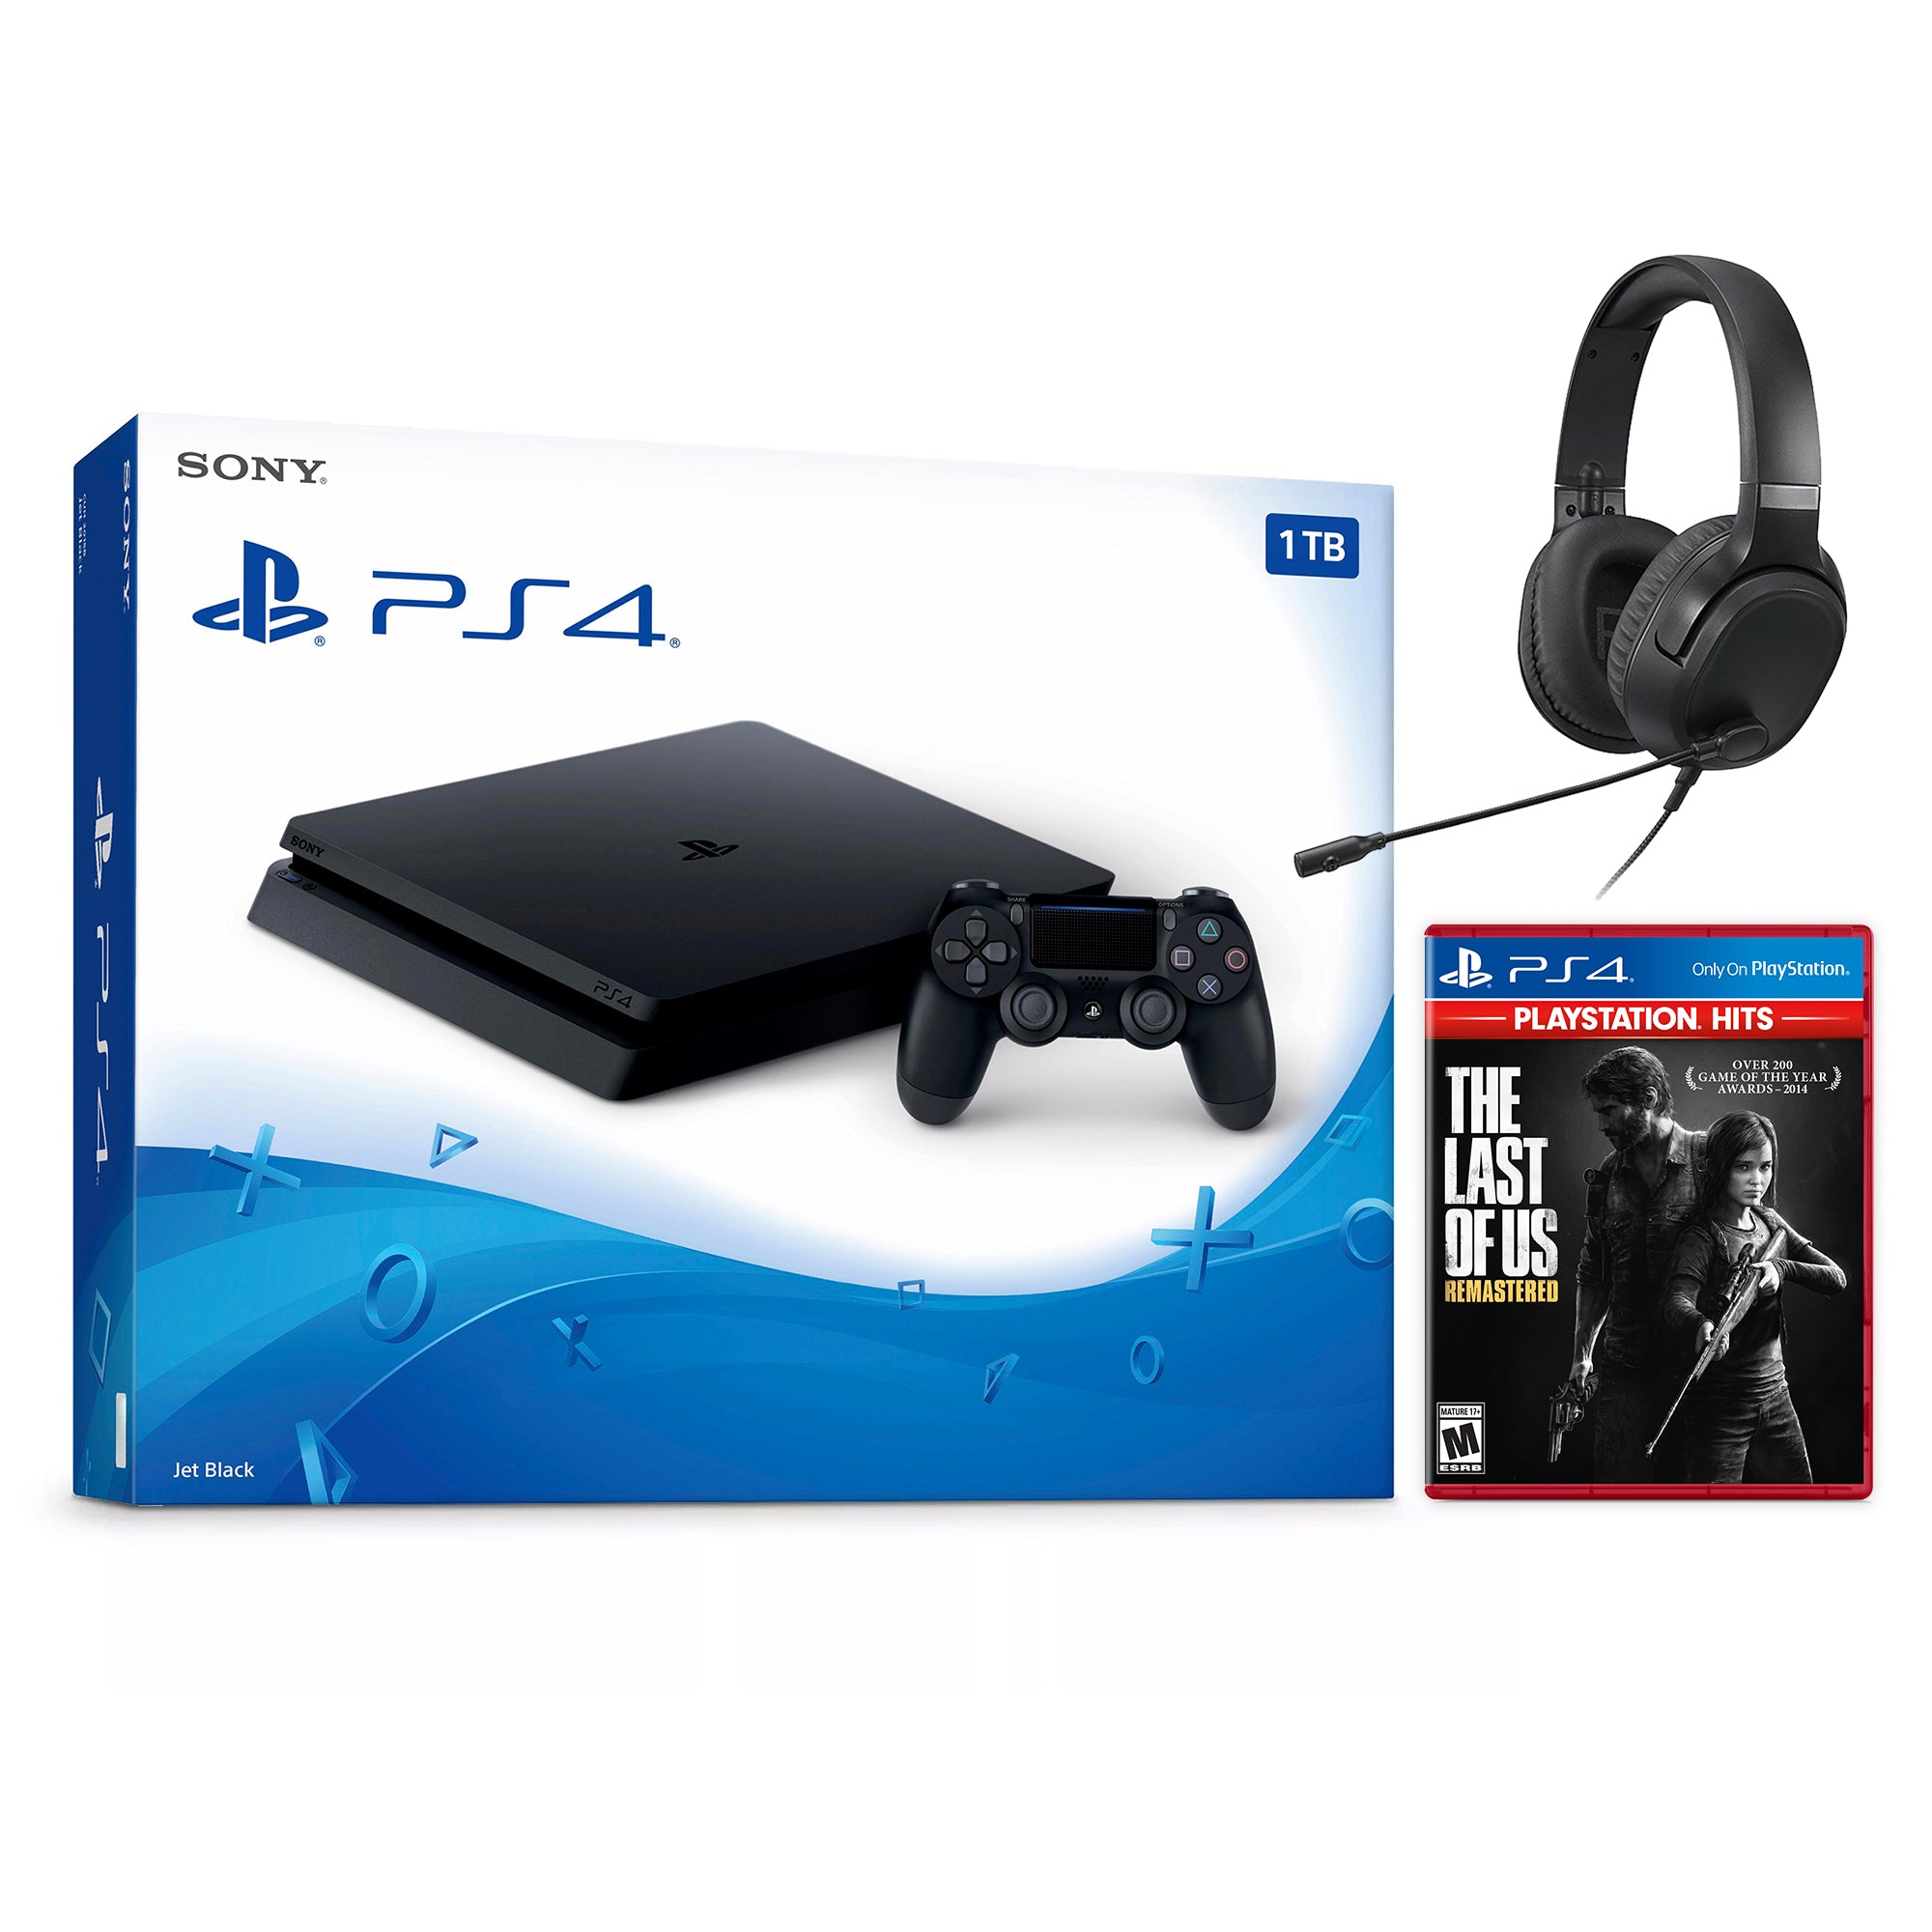 Sony PlayStation 4 Slim Call of Duty Modern Warfare II Bundle 1TB PS4 Gaming Console, Jet Black, with Mytrix Chat Headset